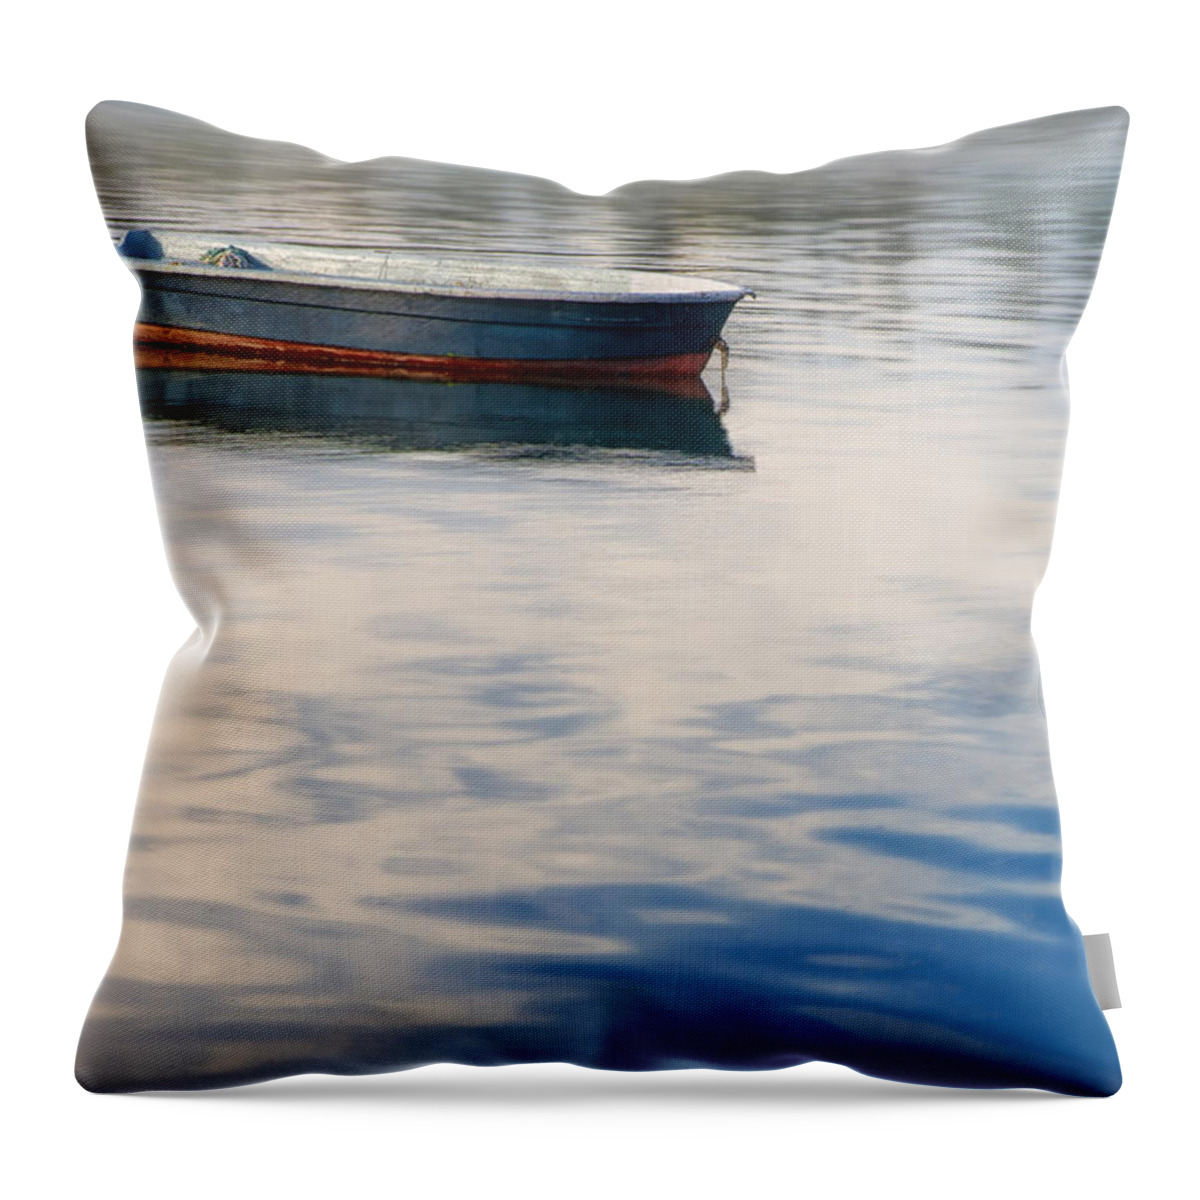 #boats Throw Pillow featuring the photograph Water Lily by Darylann Leonard Photography